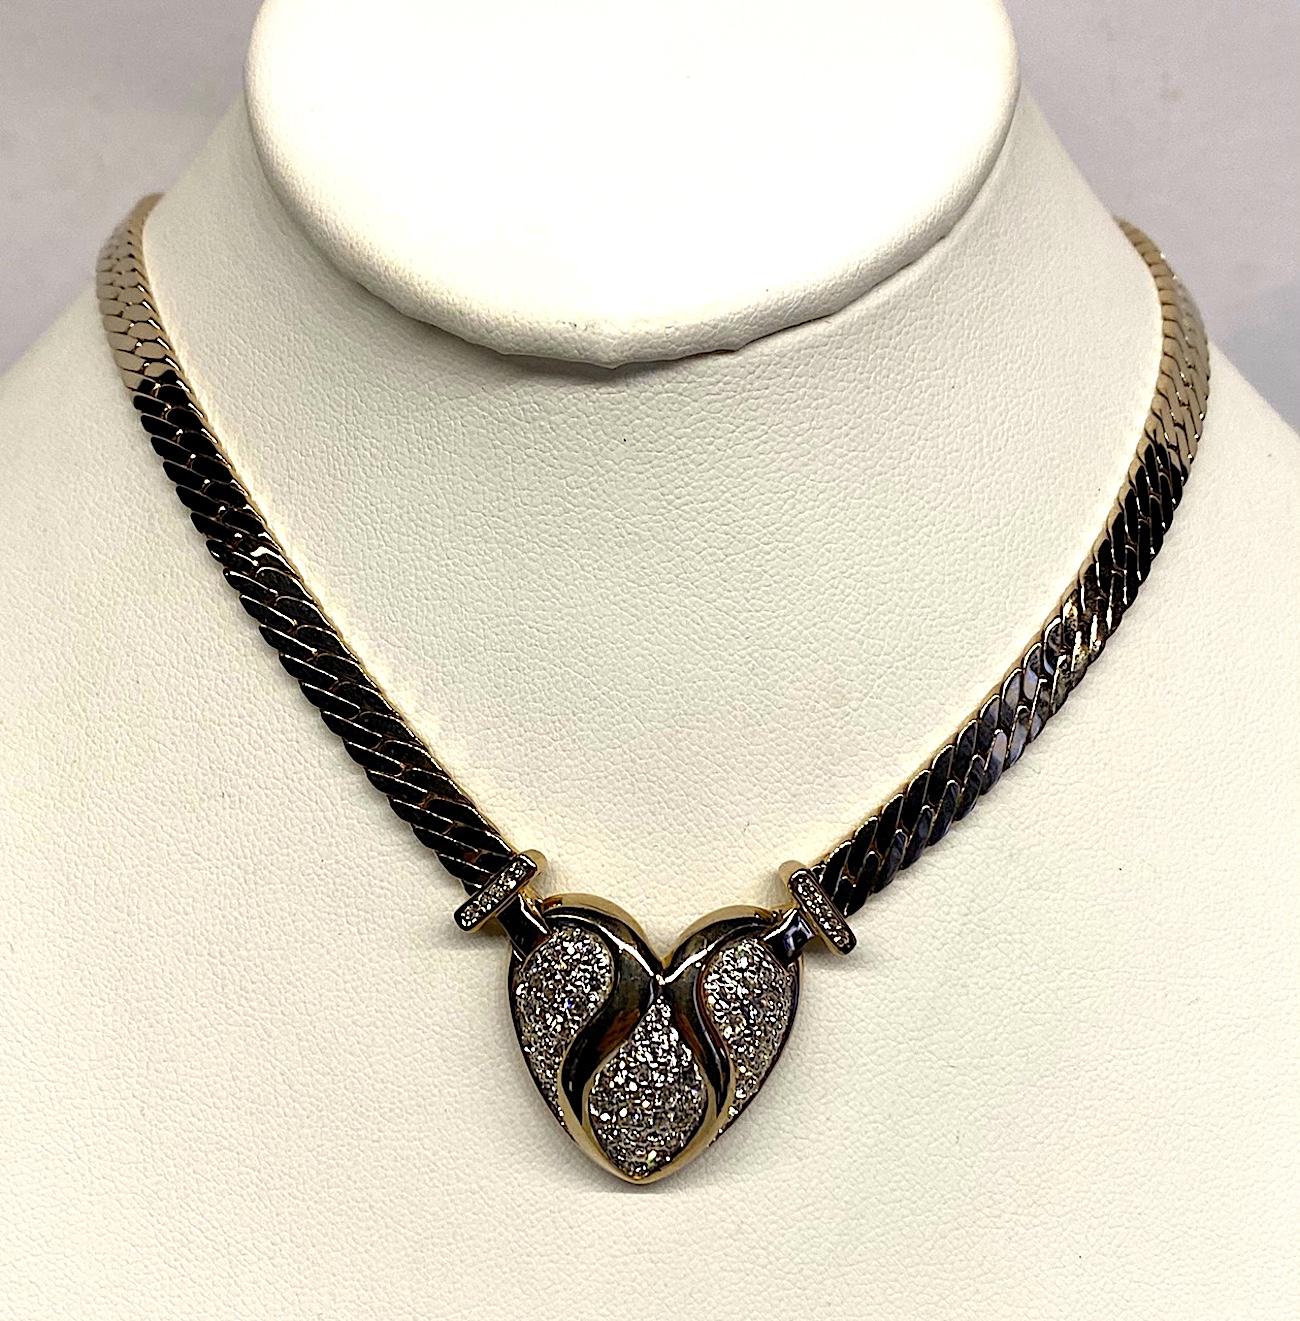 A lovely vintage heart pendant necklace by quality jewelry company Panetta circa 1980. The necklace is comprised of two gold plate flat curb link strands that meet in the center at a pave' rhinestone set heart. The heart is 1 inch wide and high in